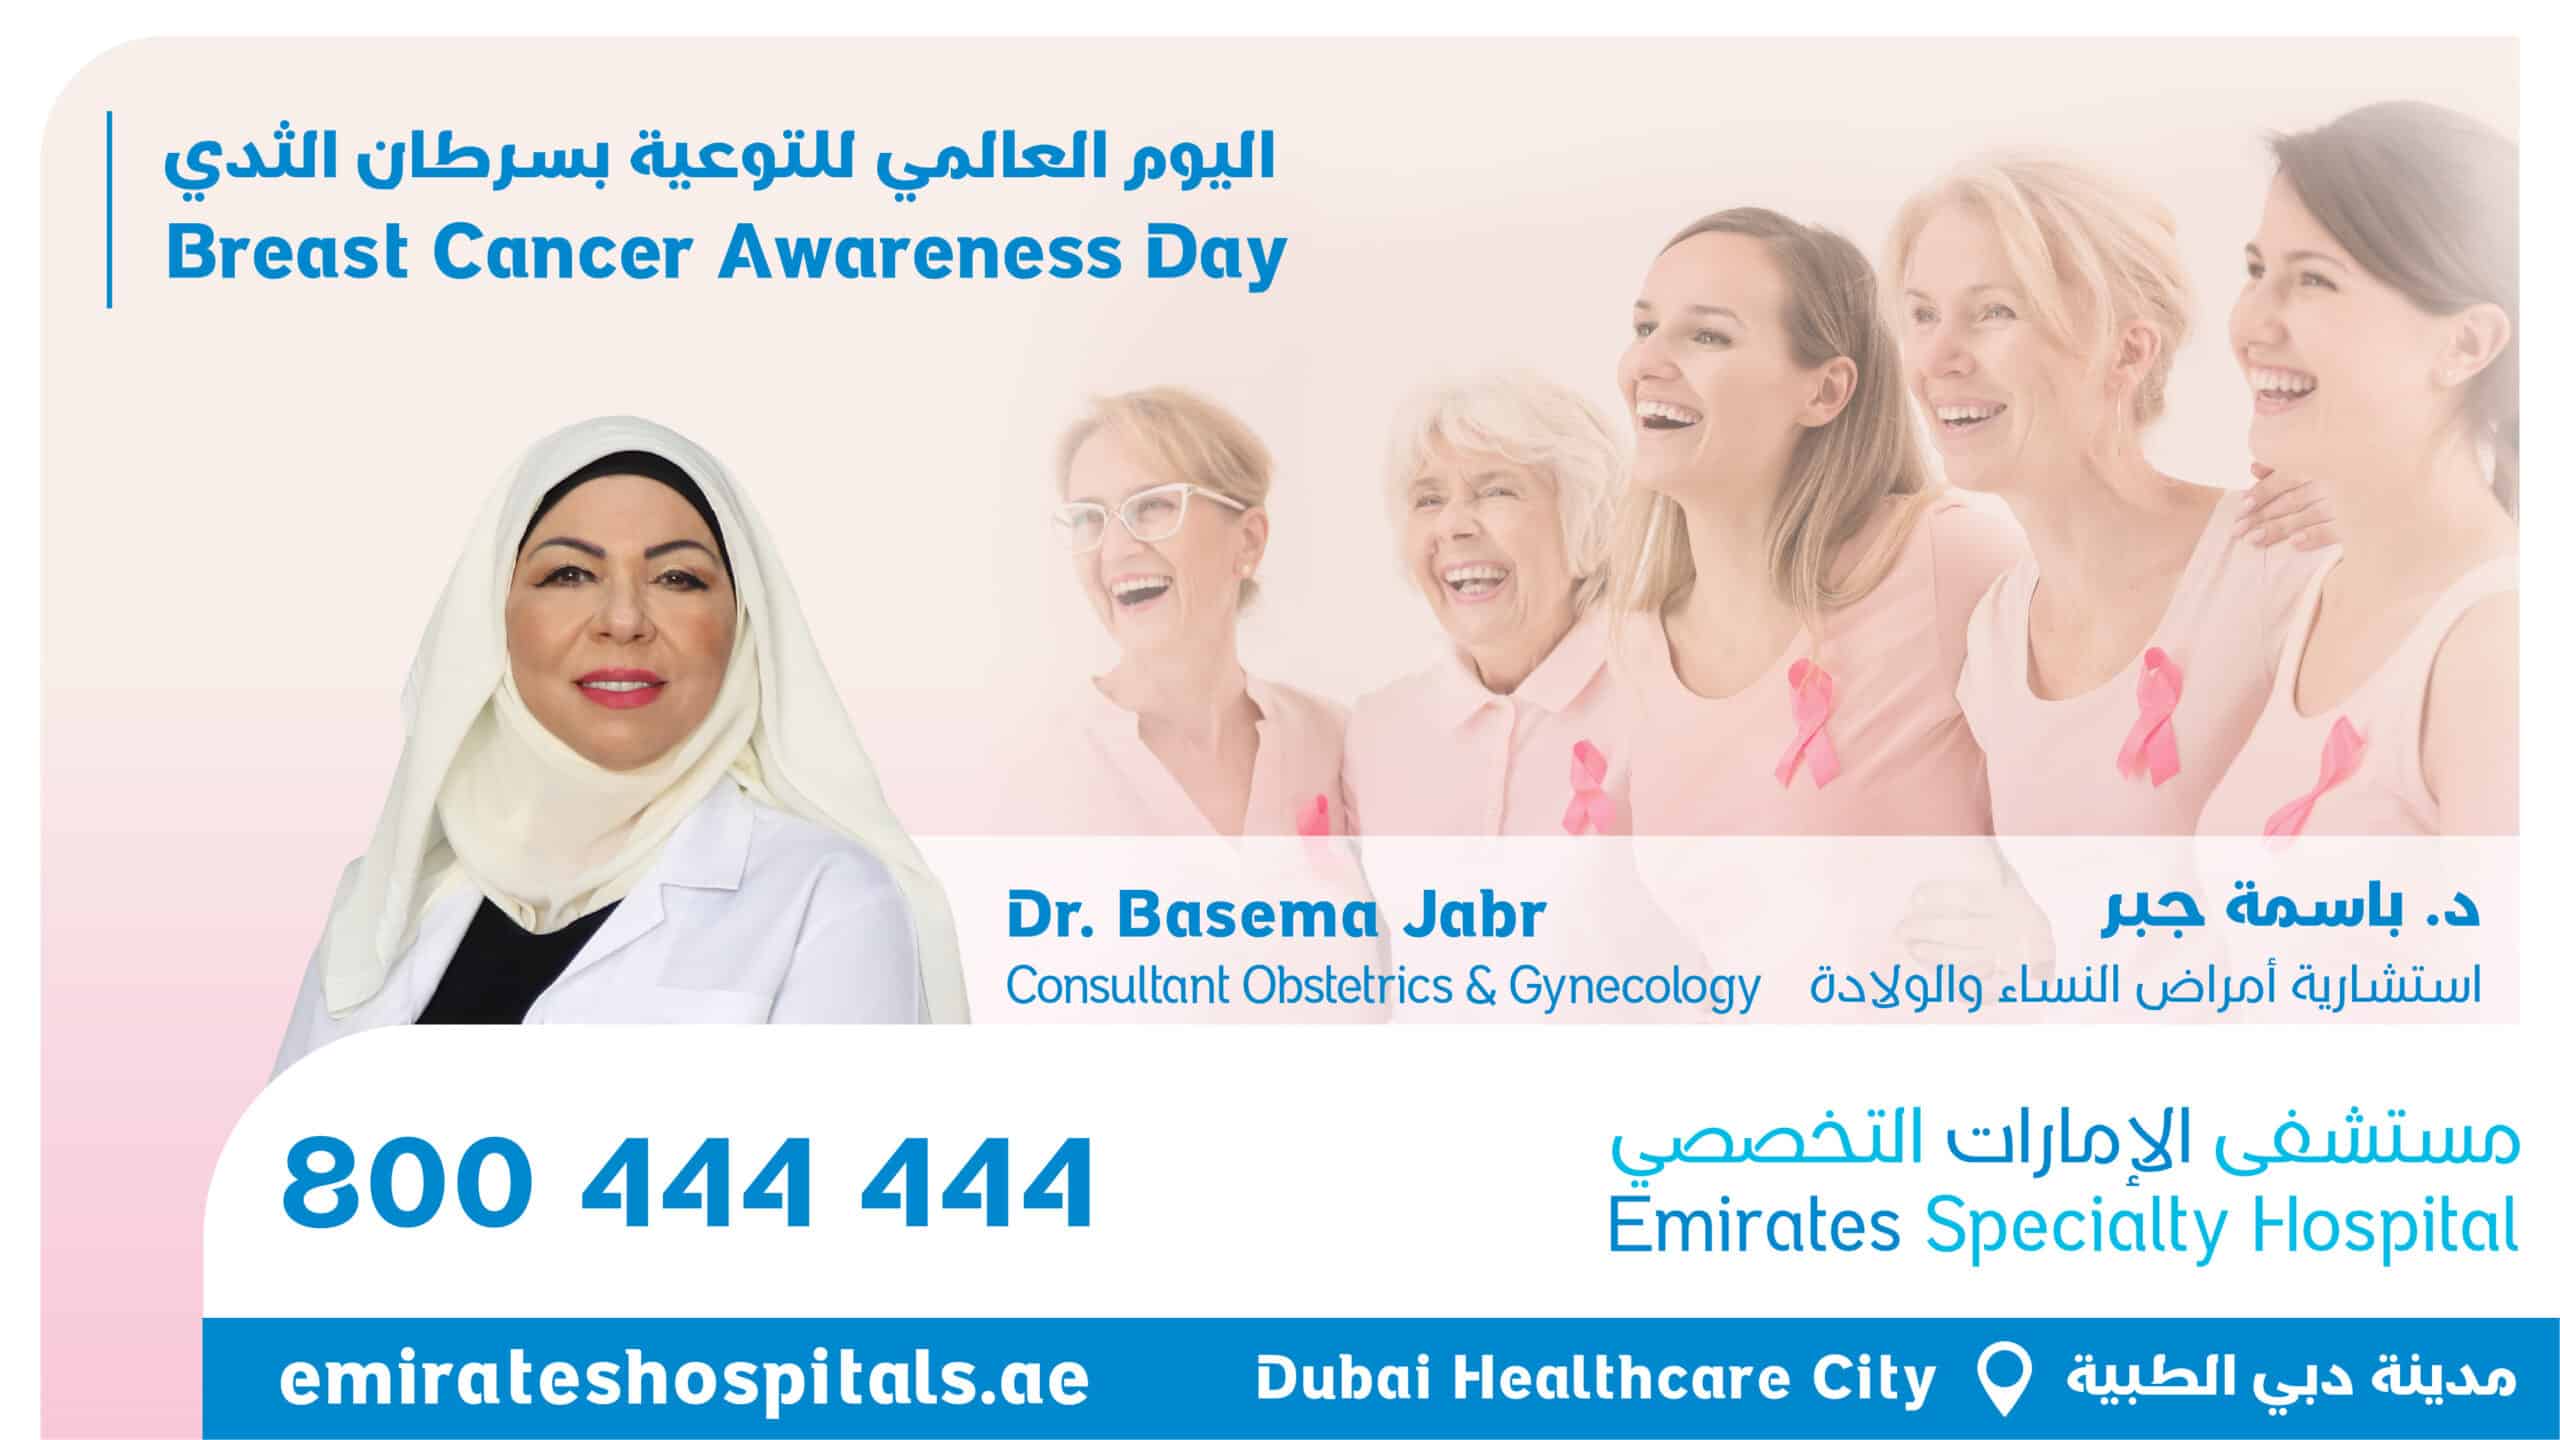 Breast Cancer Awareness Day - Dr. Basema Jabr, Consultant Obstetrics & Gynaecology